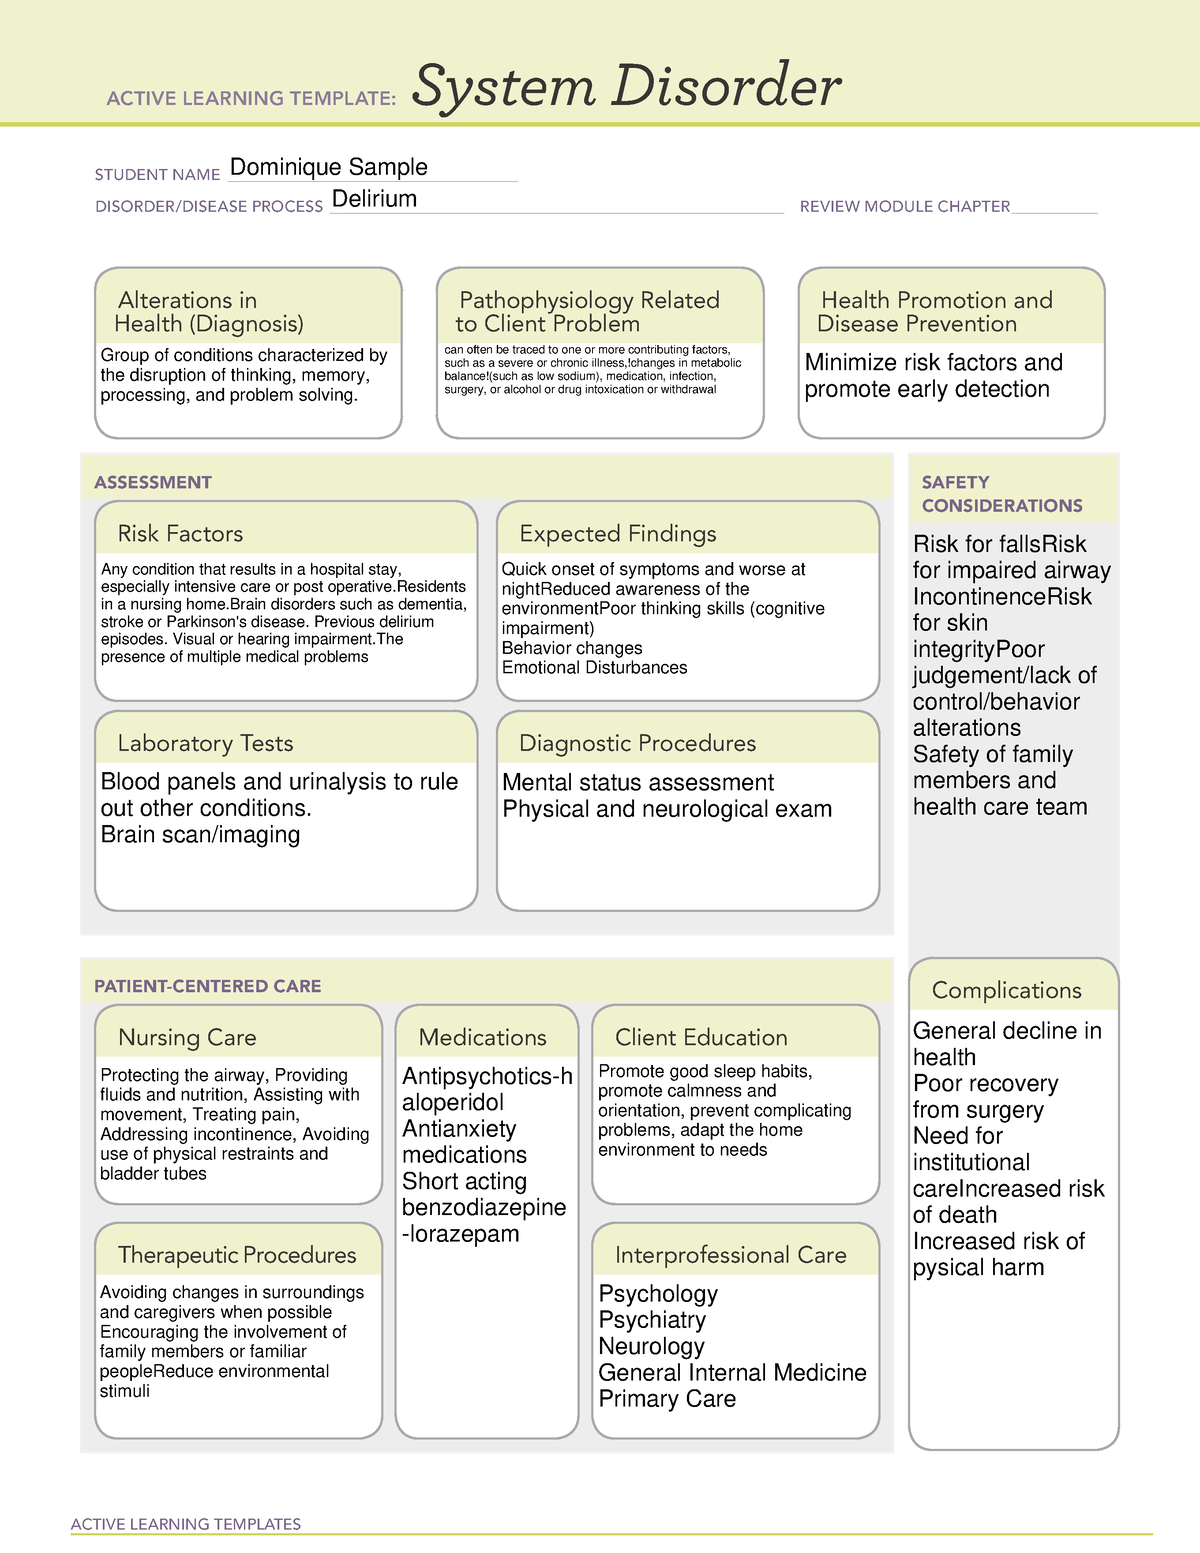 Delirium system disorder ACTIVE LEARNING TEMPLATES System Disorder